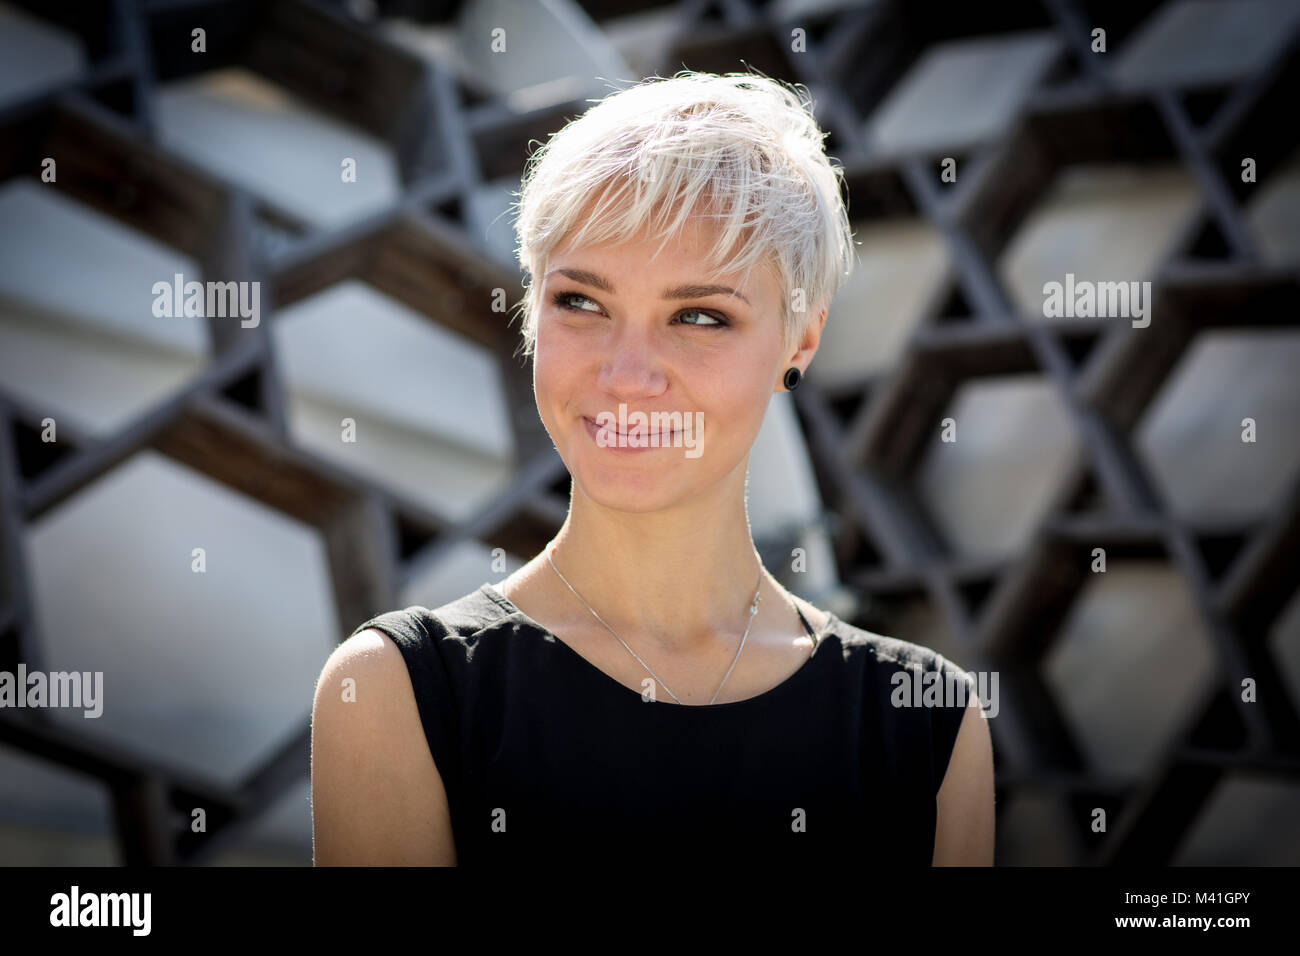 Portrait of woman in city Stock Photo